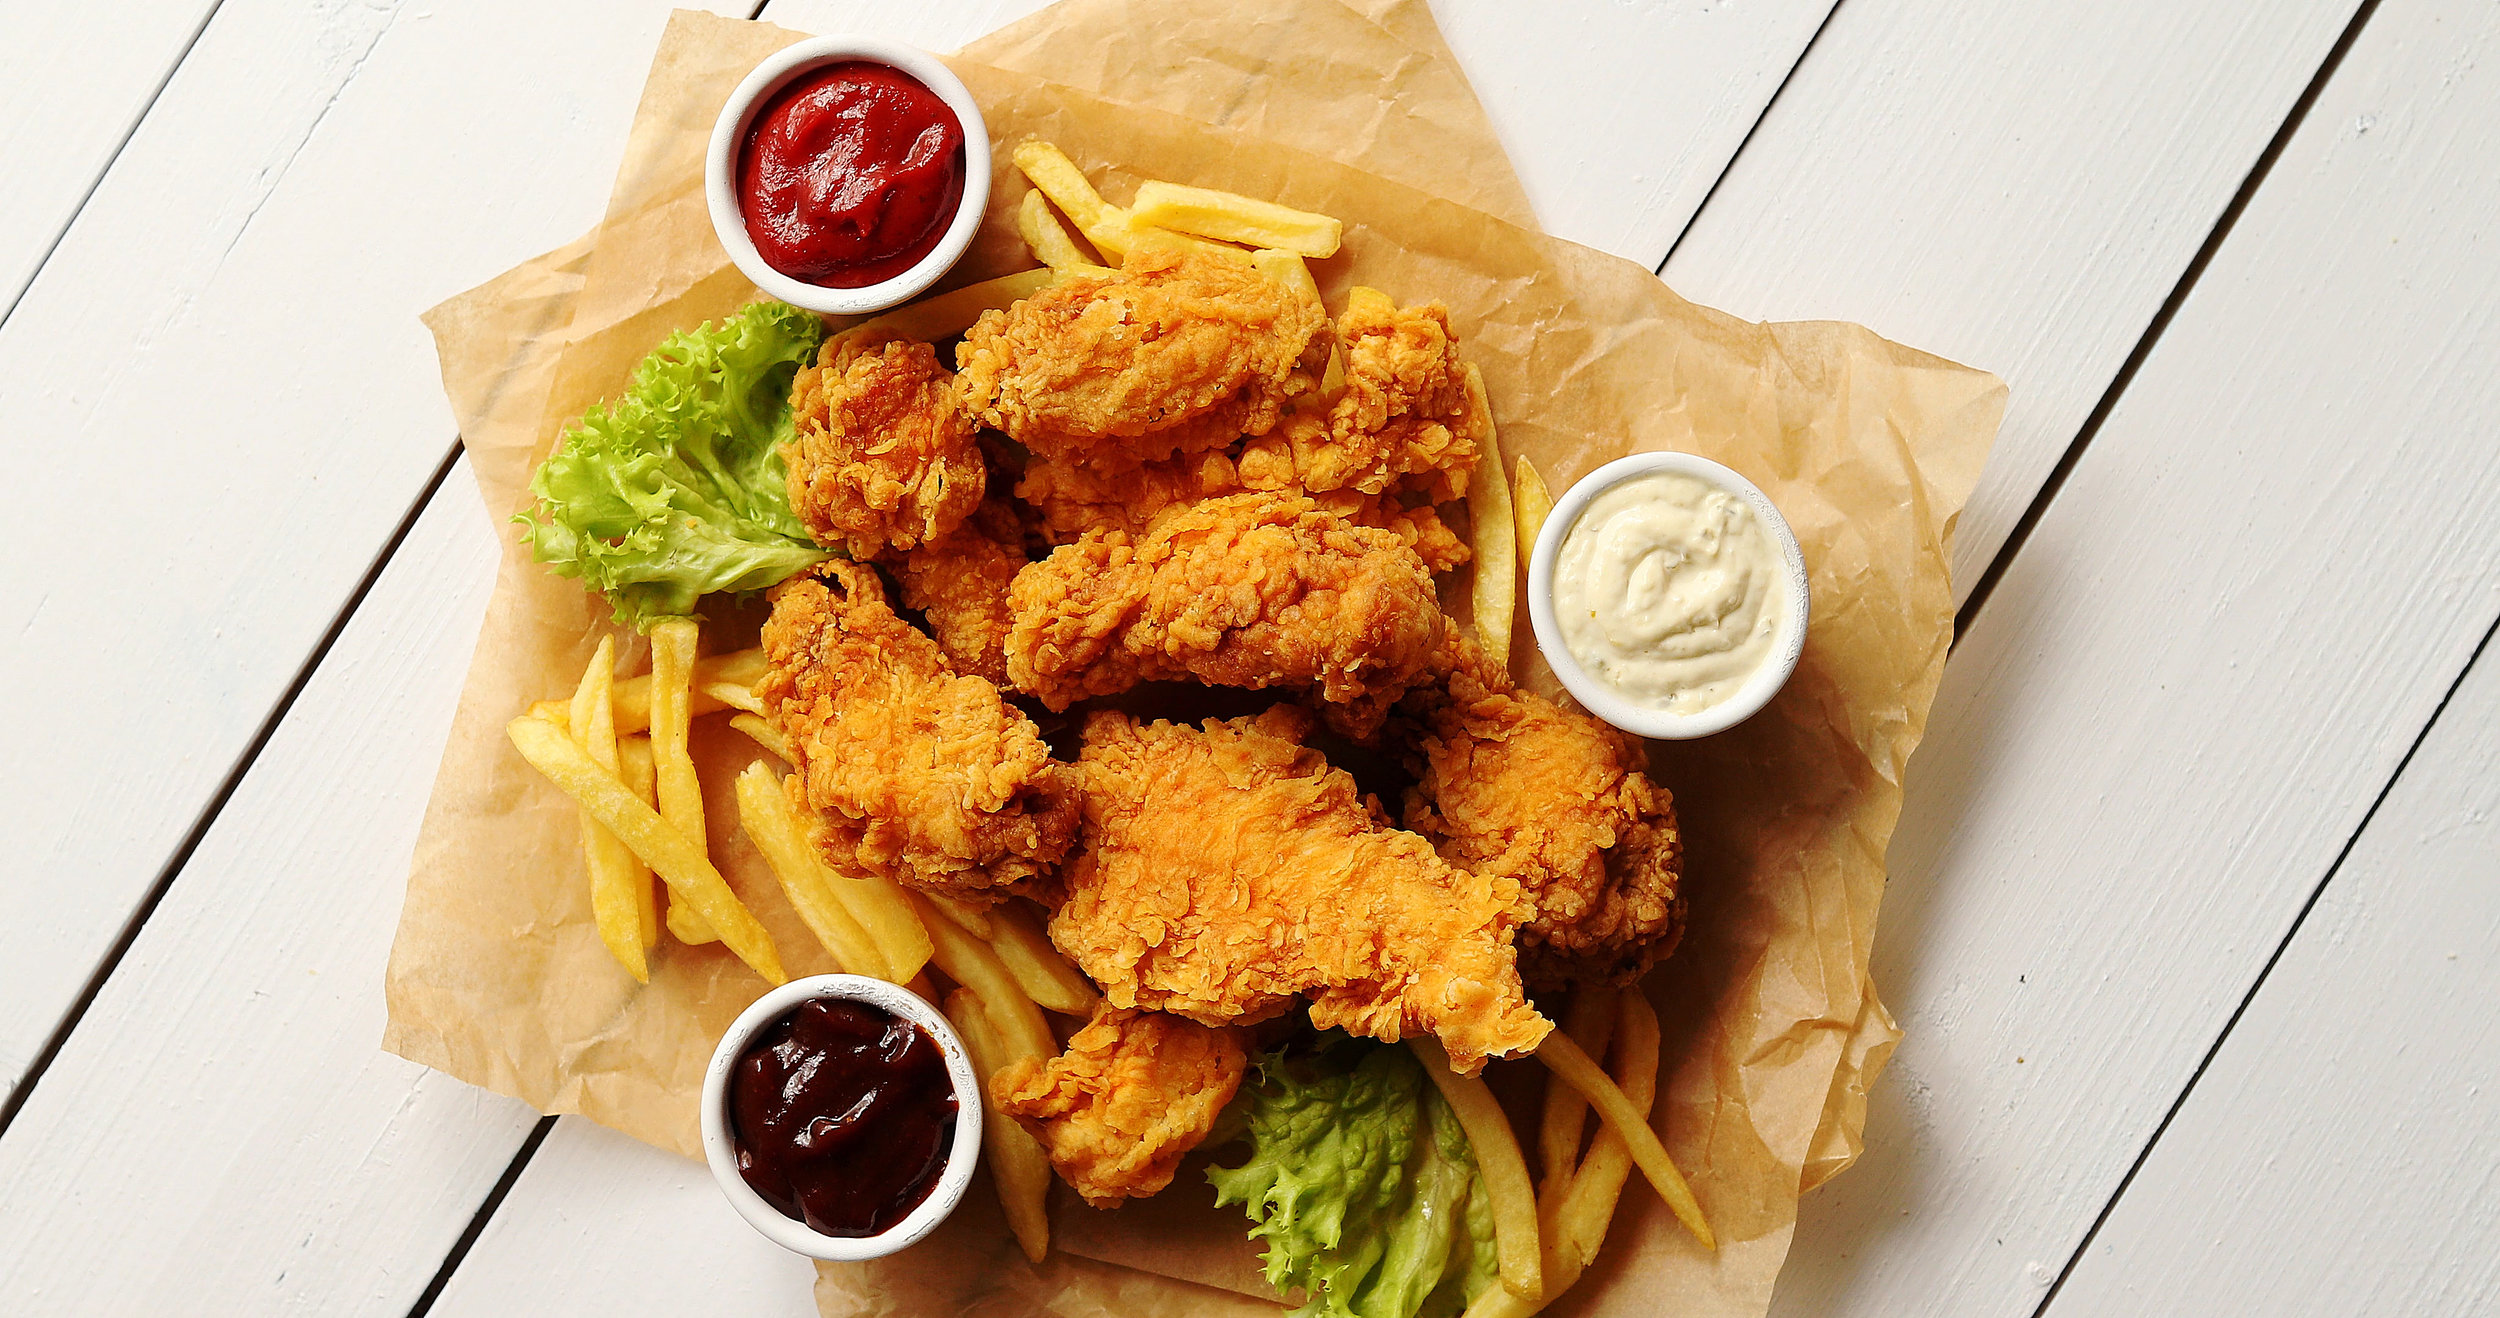 sauces-and-lettuce-near-french-fries-and-chicken-W4E6BNS.jpg